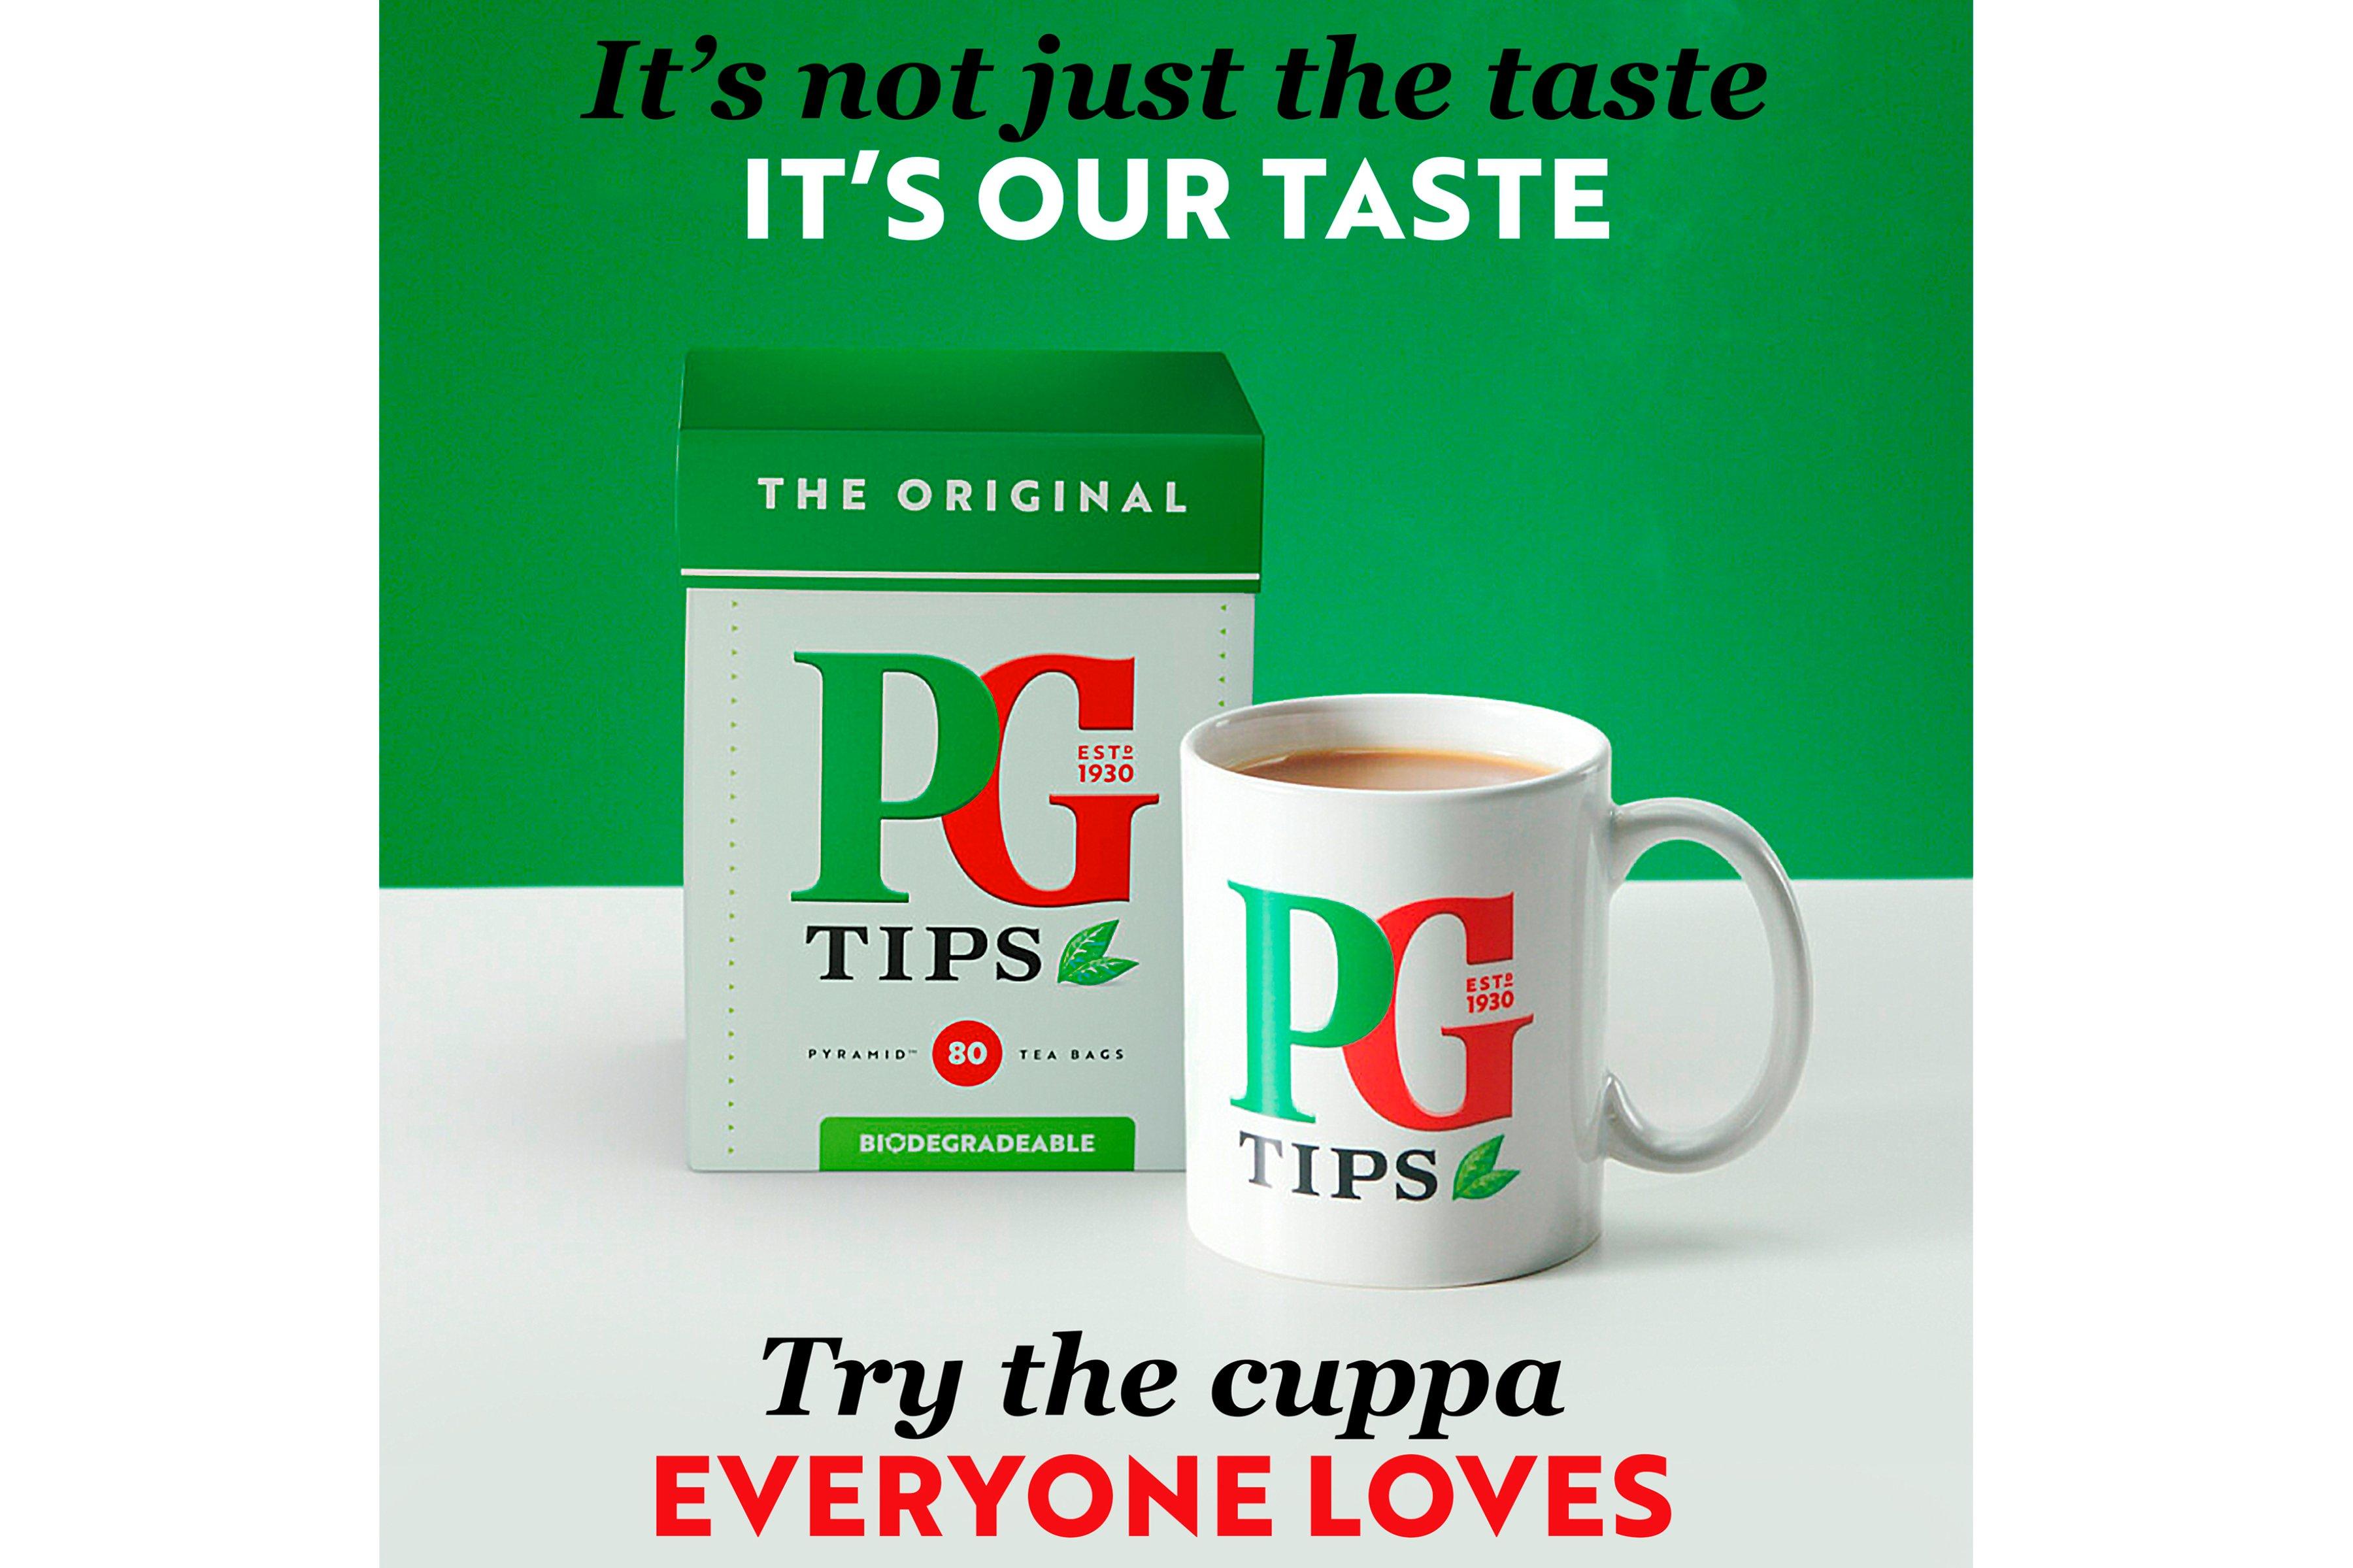 PG Tips Enveloped Tagged Teabags (200 Pack)